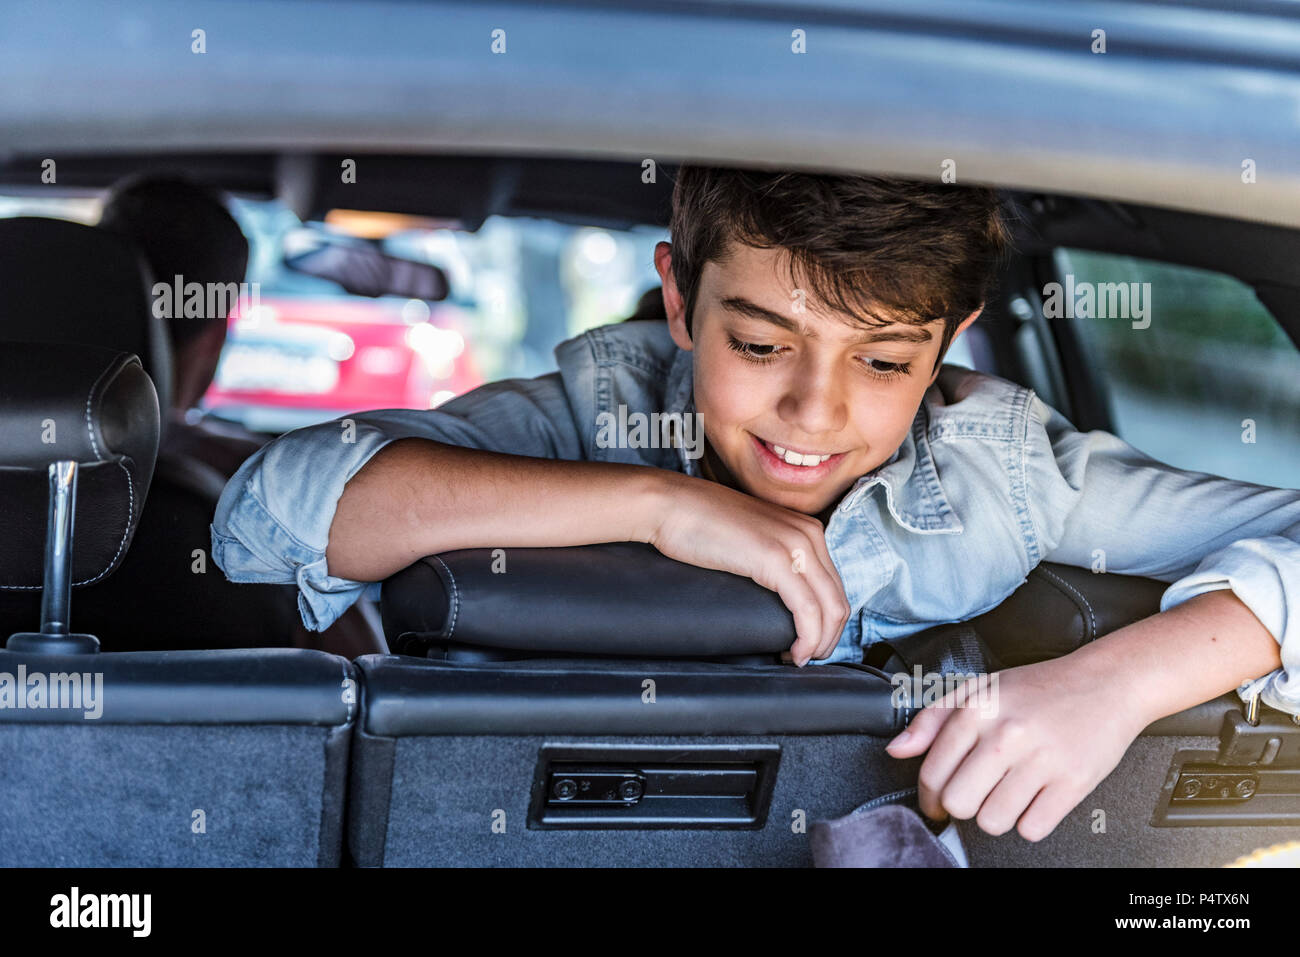 Smiling boy in car looking in boot Stock Photo